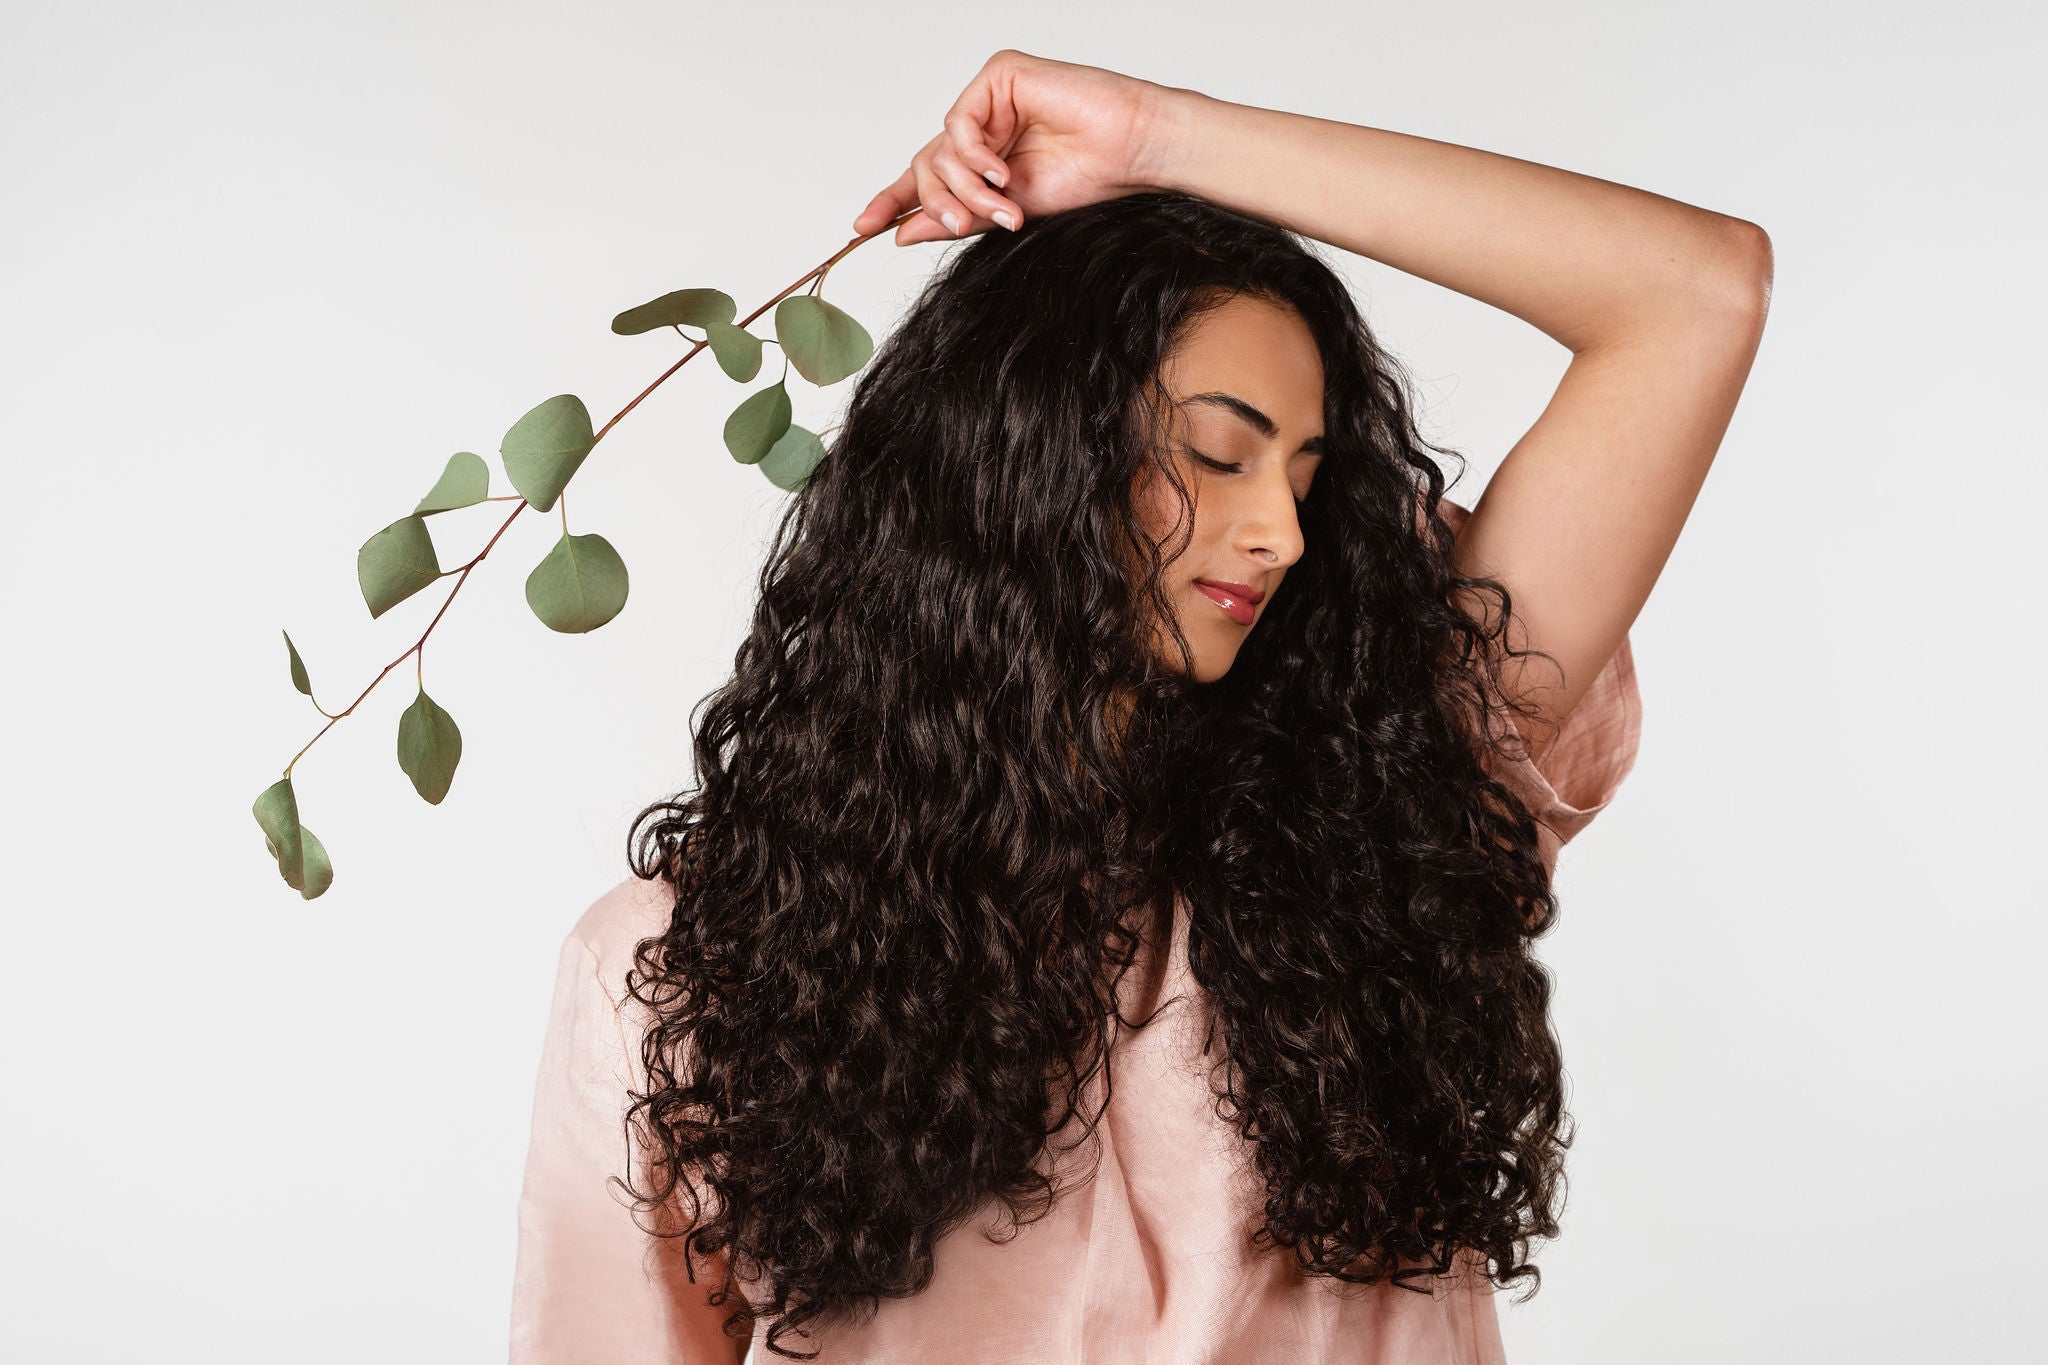 What to Expect When Switching to Professional, Clean Haircare - Hair Holistic